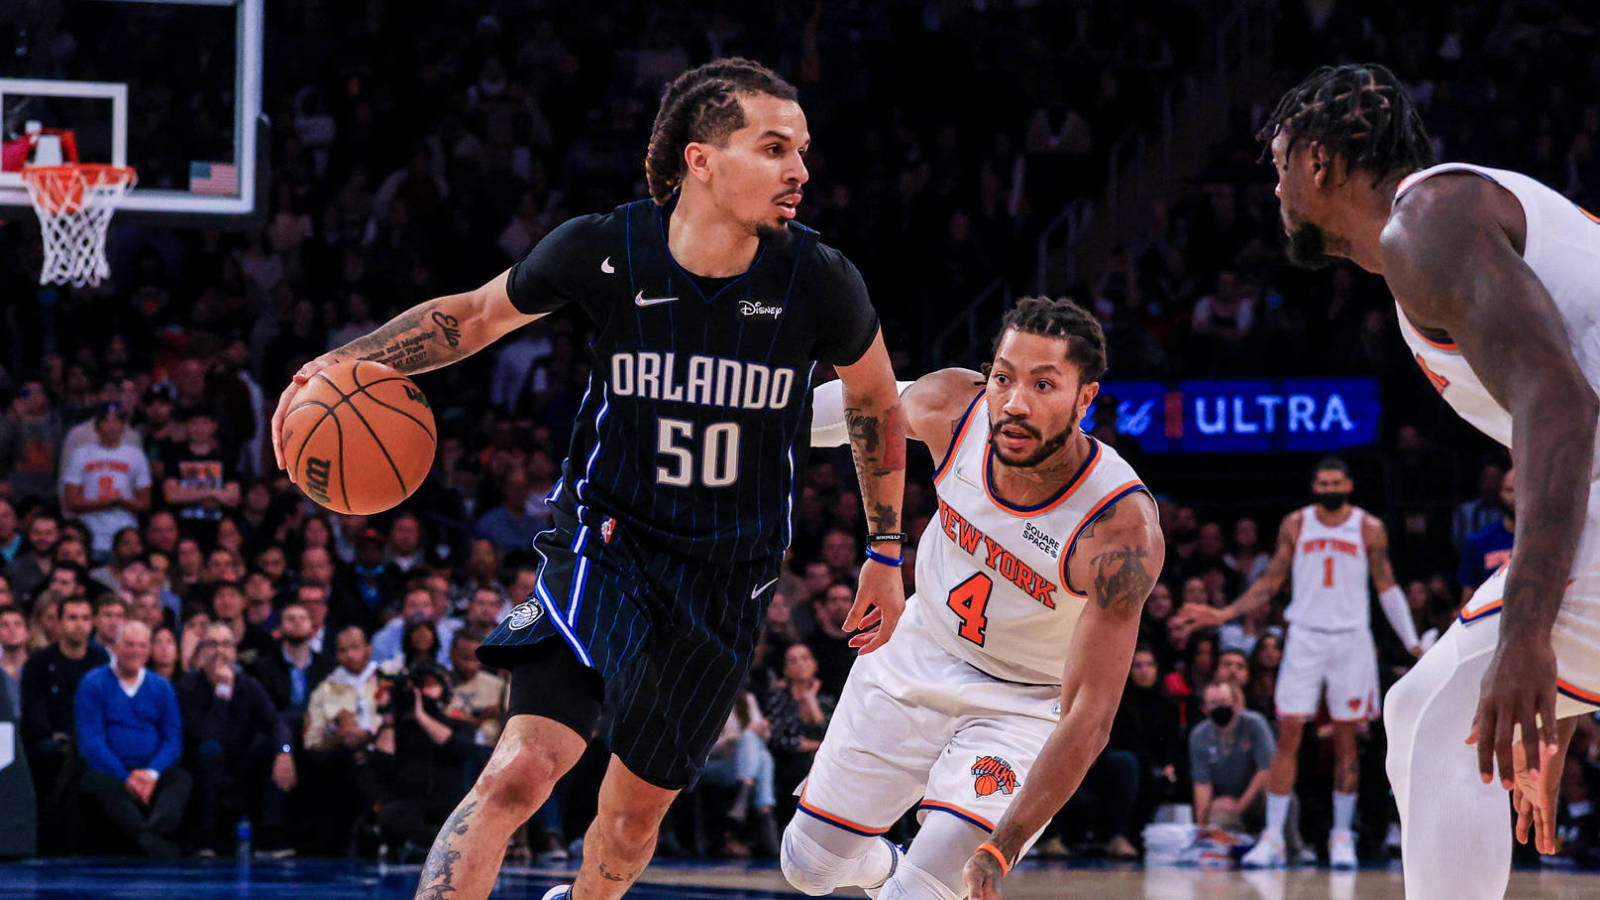 No Cap: Cole Anthony's Quest To Become Elite